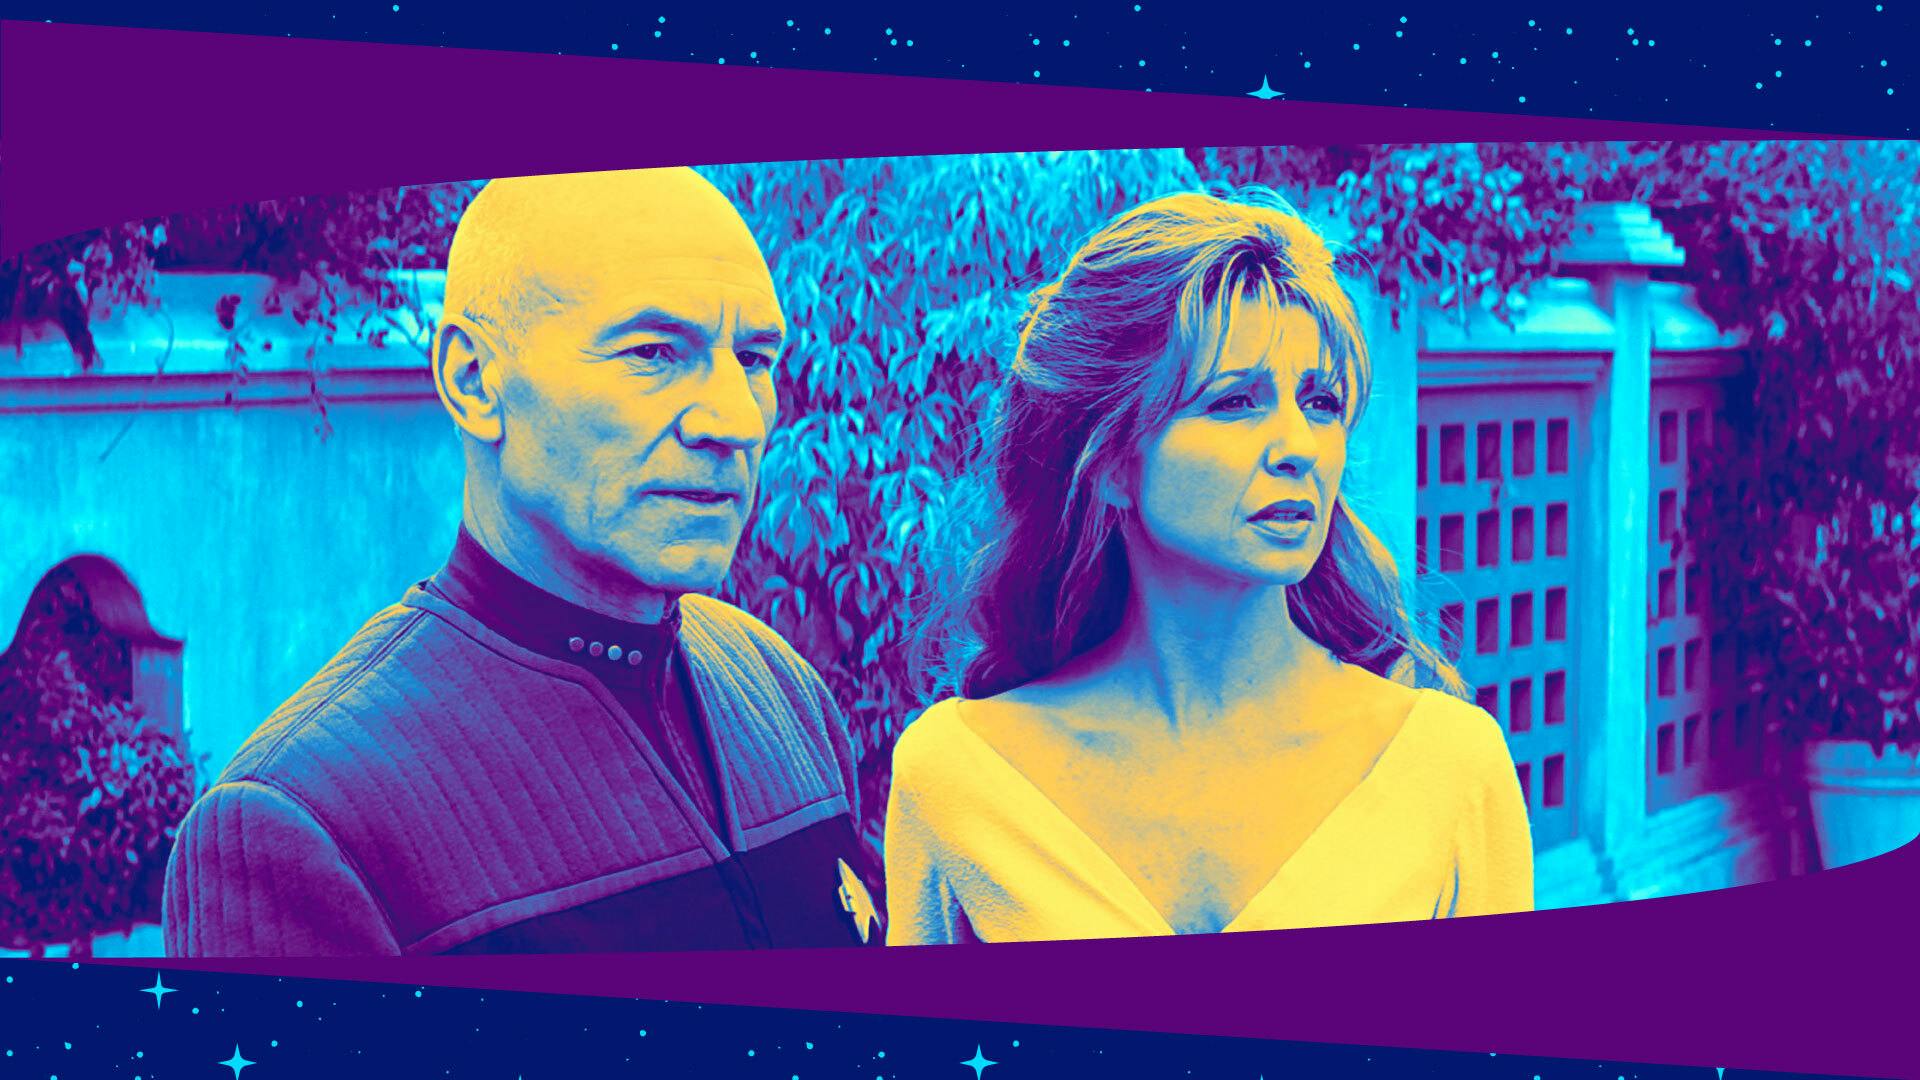 Stylized and filtered still from Star Trek Insurrection featuring Jean-Luc Picard